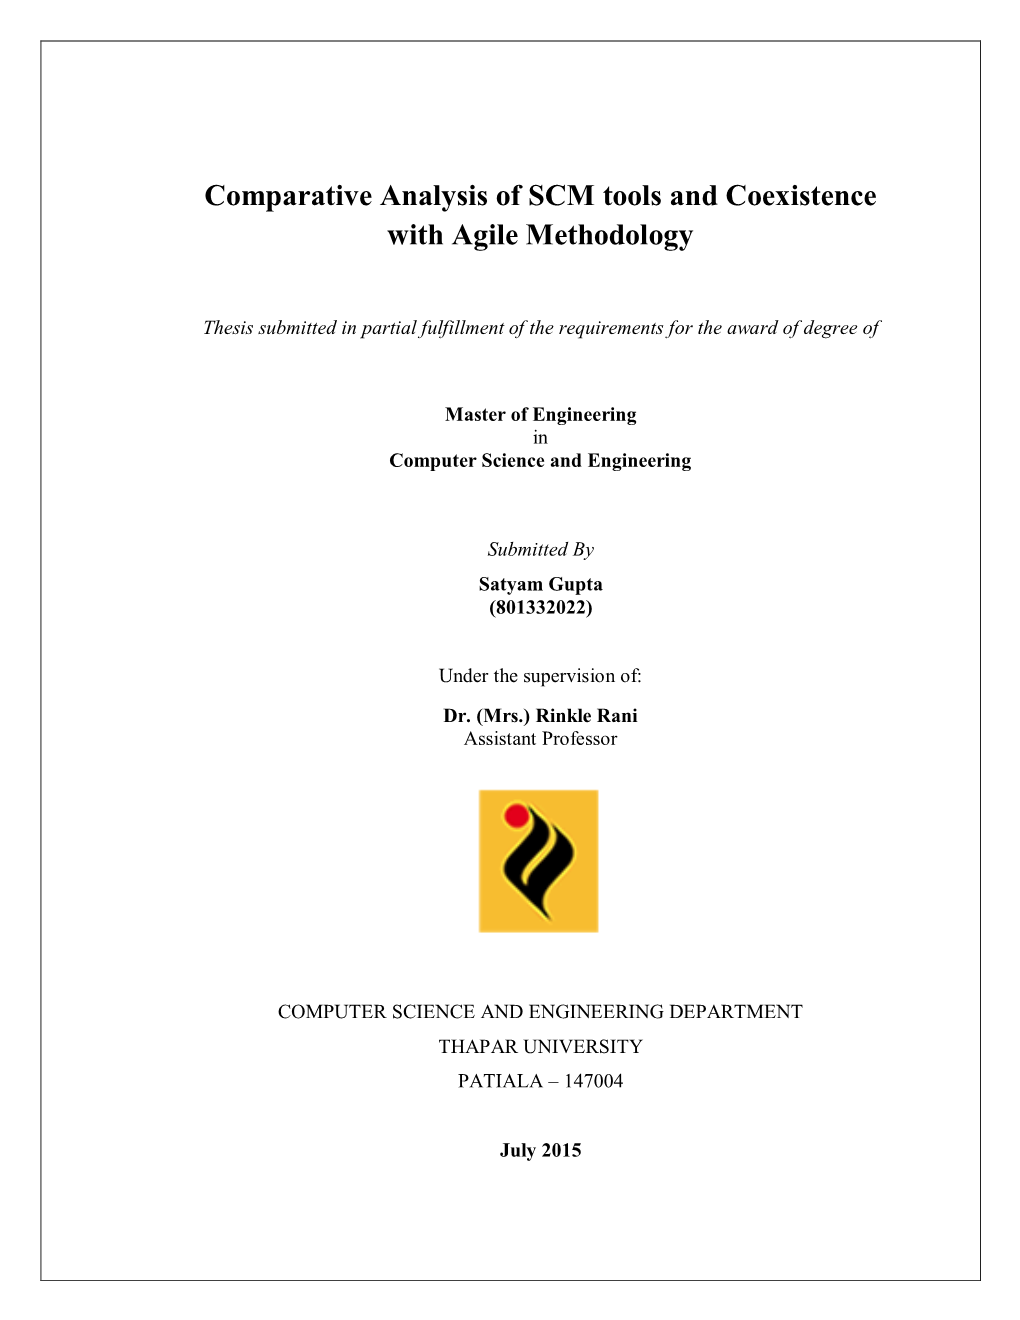 Comparative Analysis of SCM Tools and Coexistence with Agile Methodology